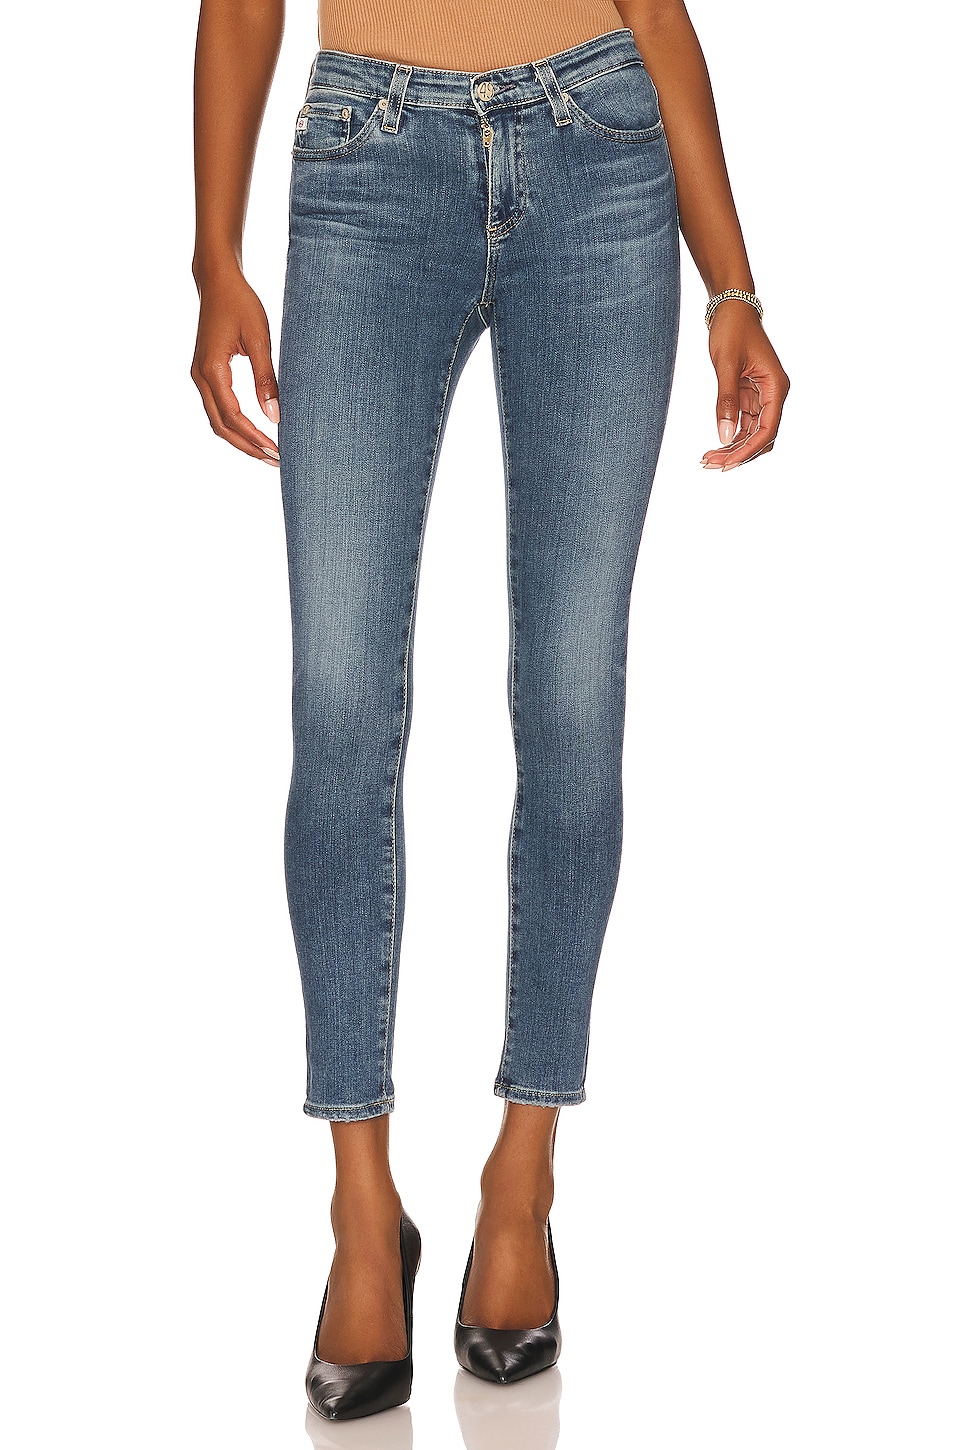 schroef Beg rijst AG Jeans Legging Ankle in 14 Years Old Topanga | REVOLVE